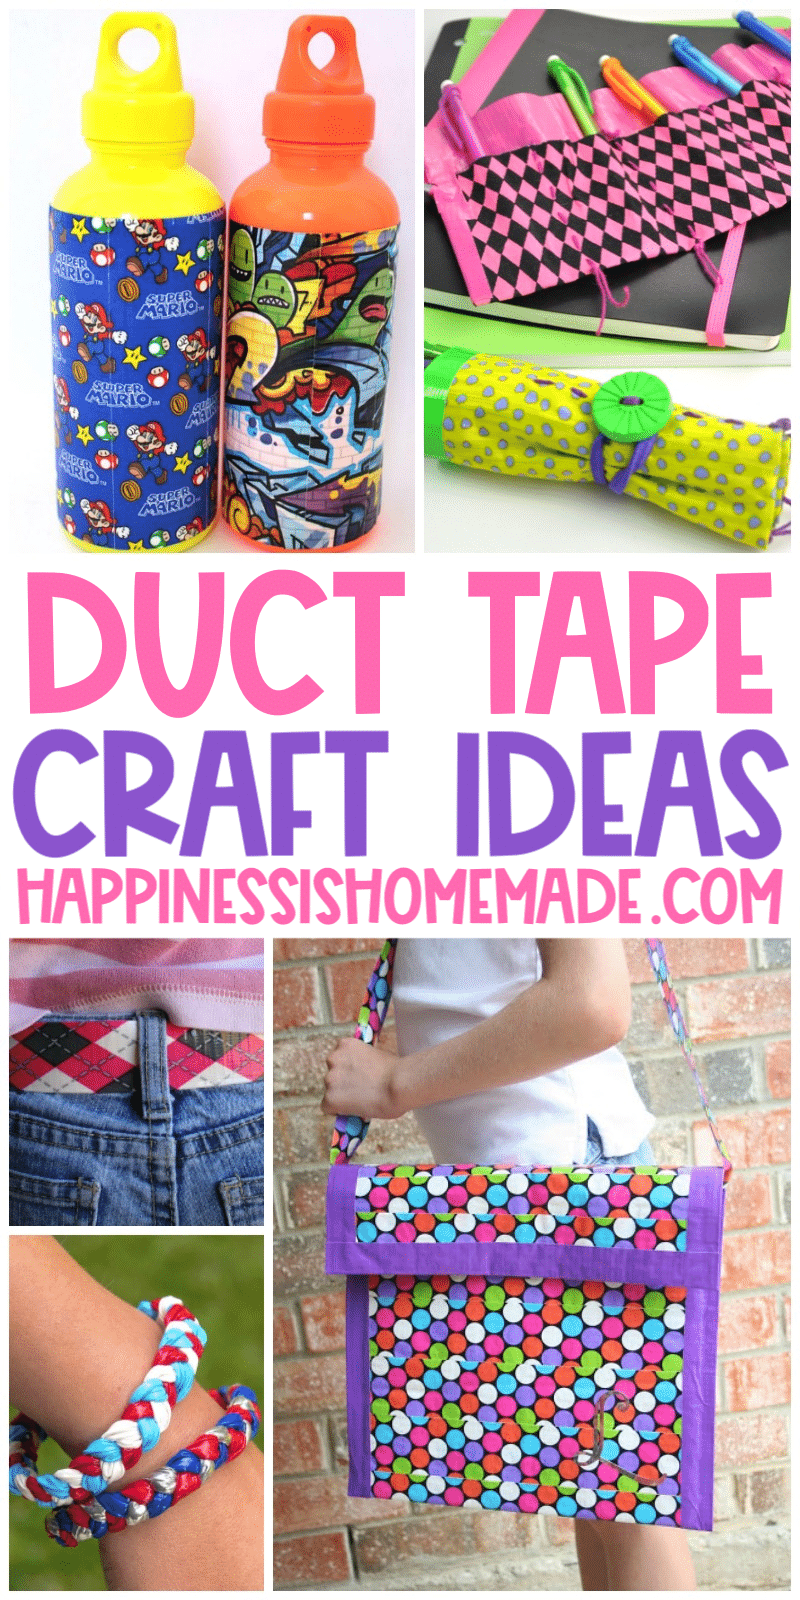 10 DIY Washi Tape Decorating Ideas To Add Color To Your Home